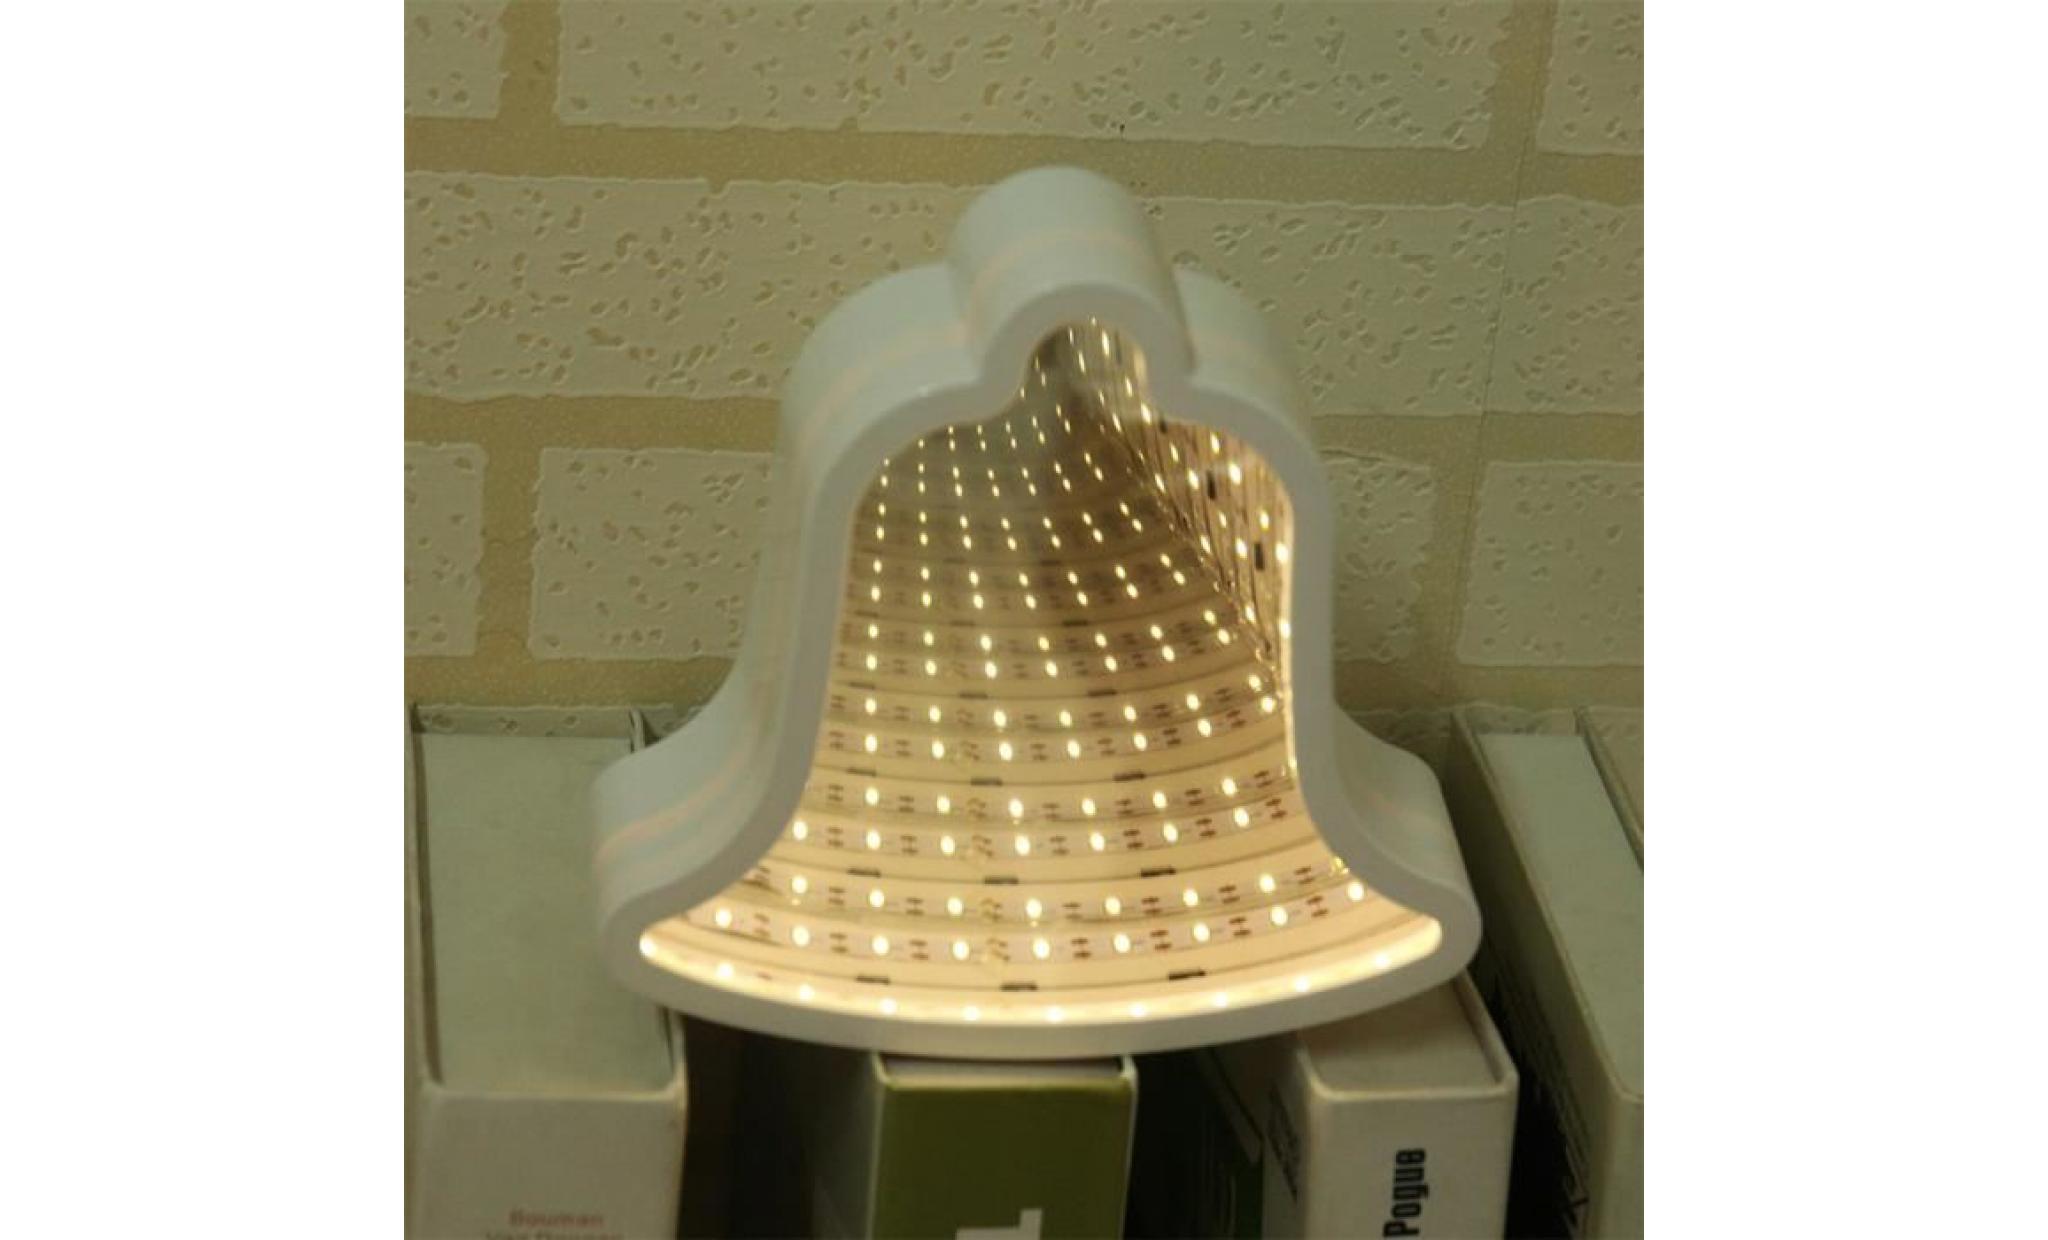 marquee led night light chambre tunnel modeling home décor batterie lampe mur_led2687 pas cher